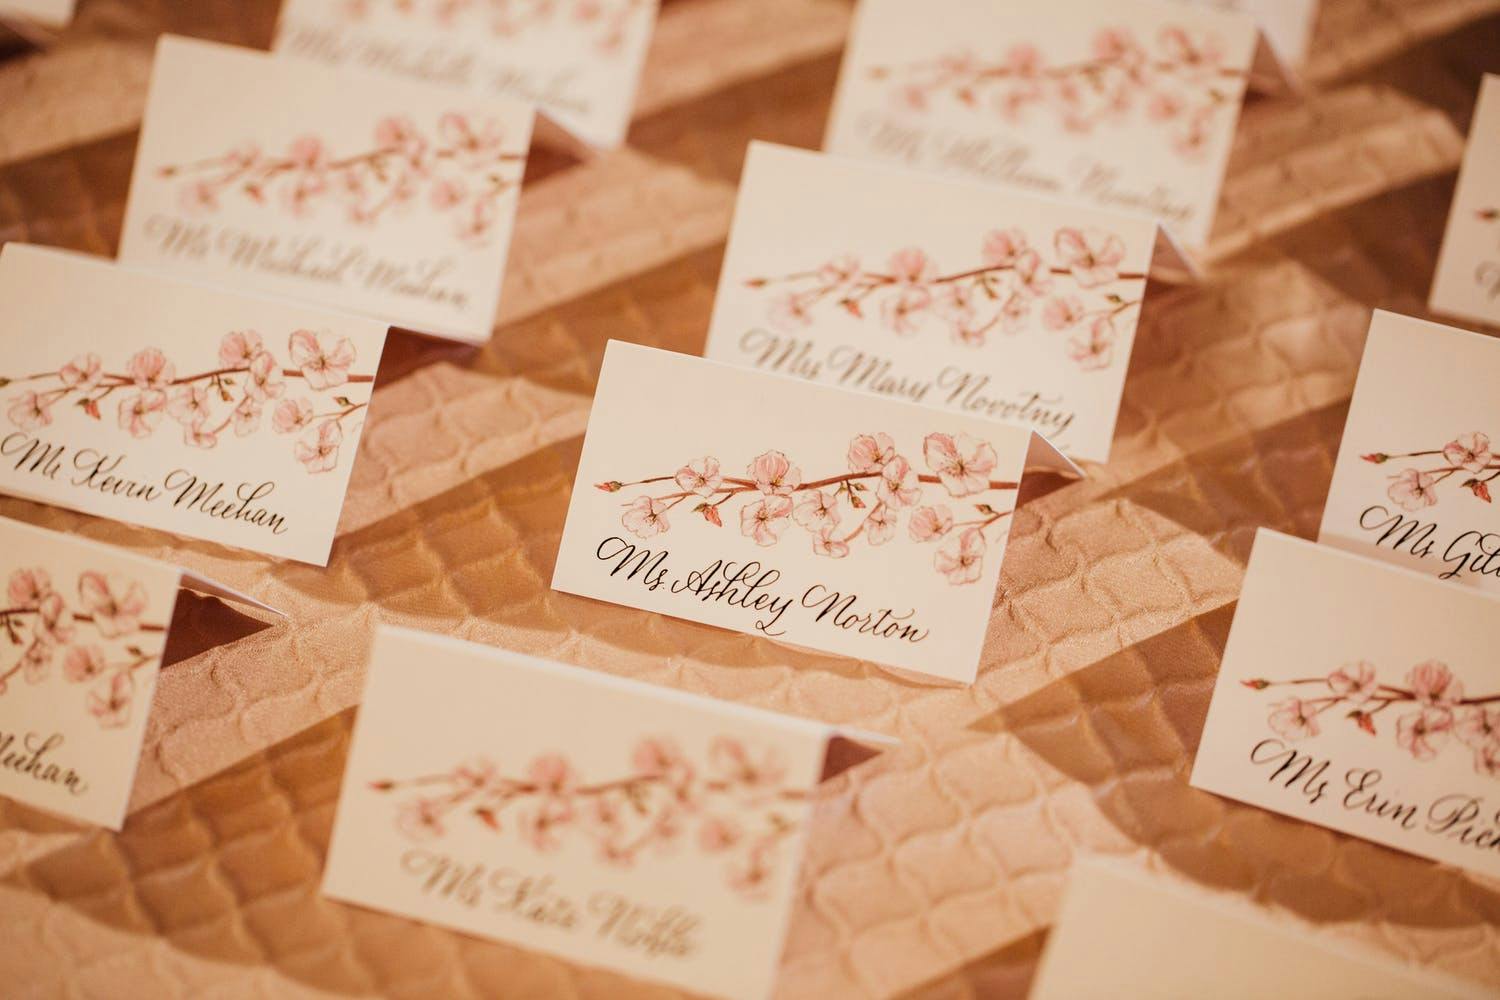 Wedding Escort Cards With Painted Cherry Blossom Designs | PartySlate